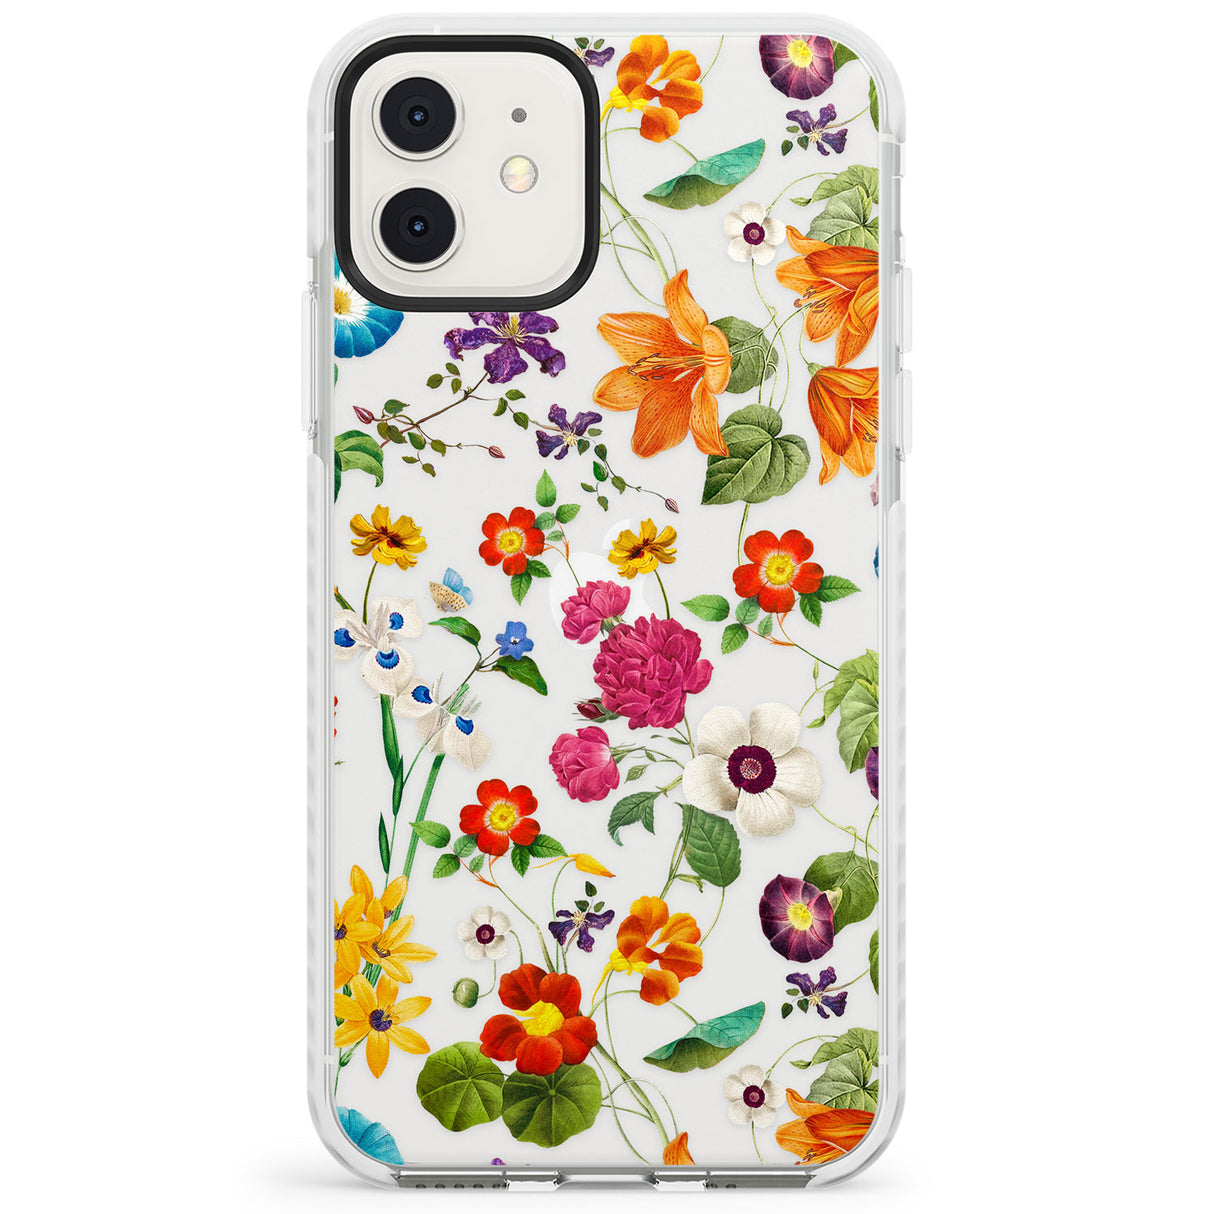 Whimsical Wildflowers Impact Phone Case for iPhone 11, iphone 12